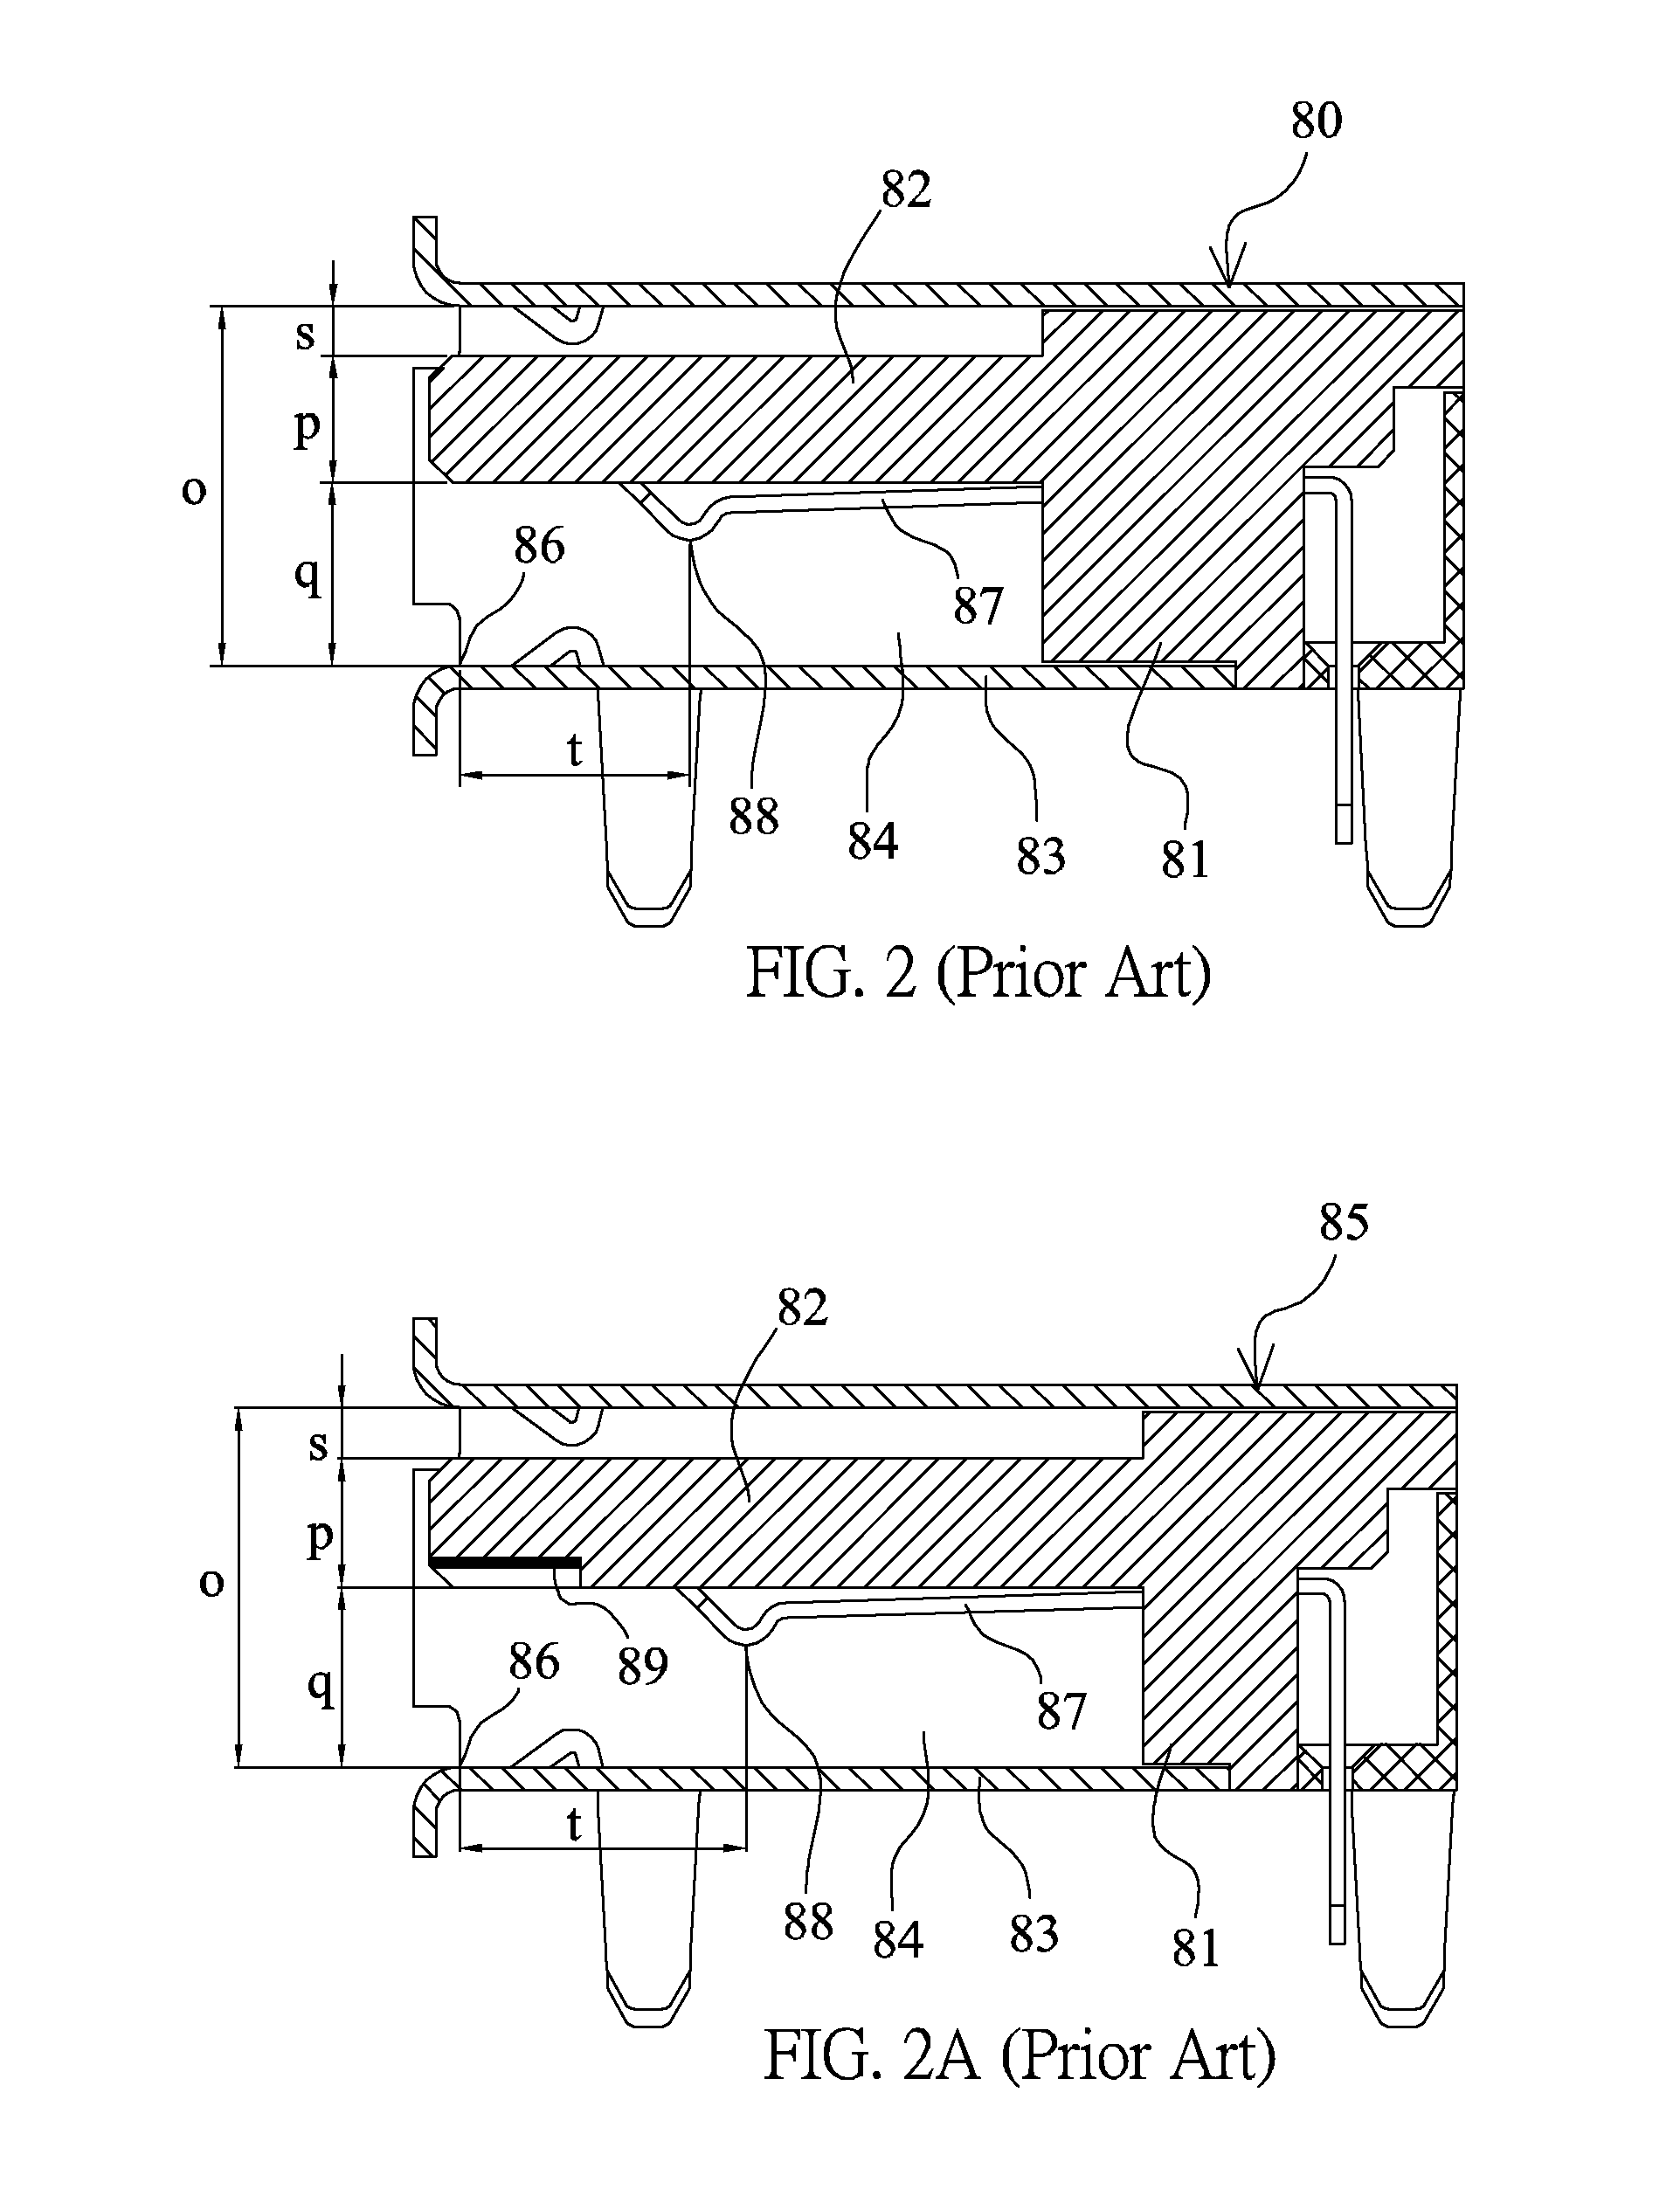 Electrical connector for bidirectional plug insertion